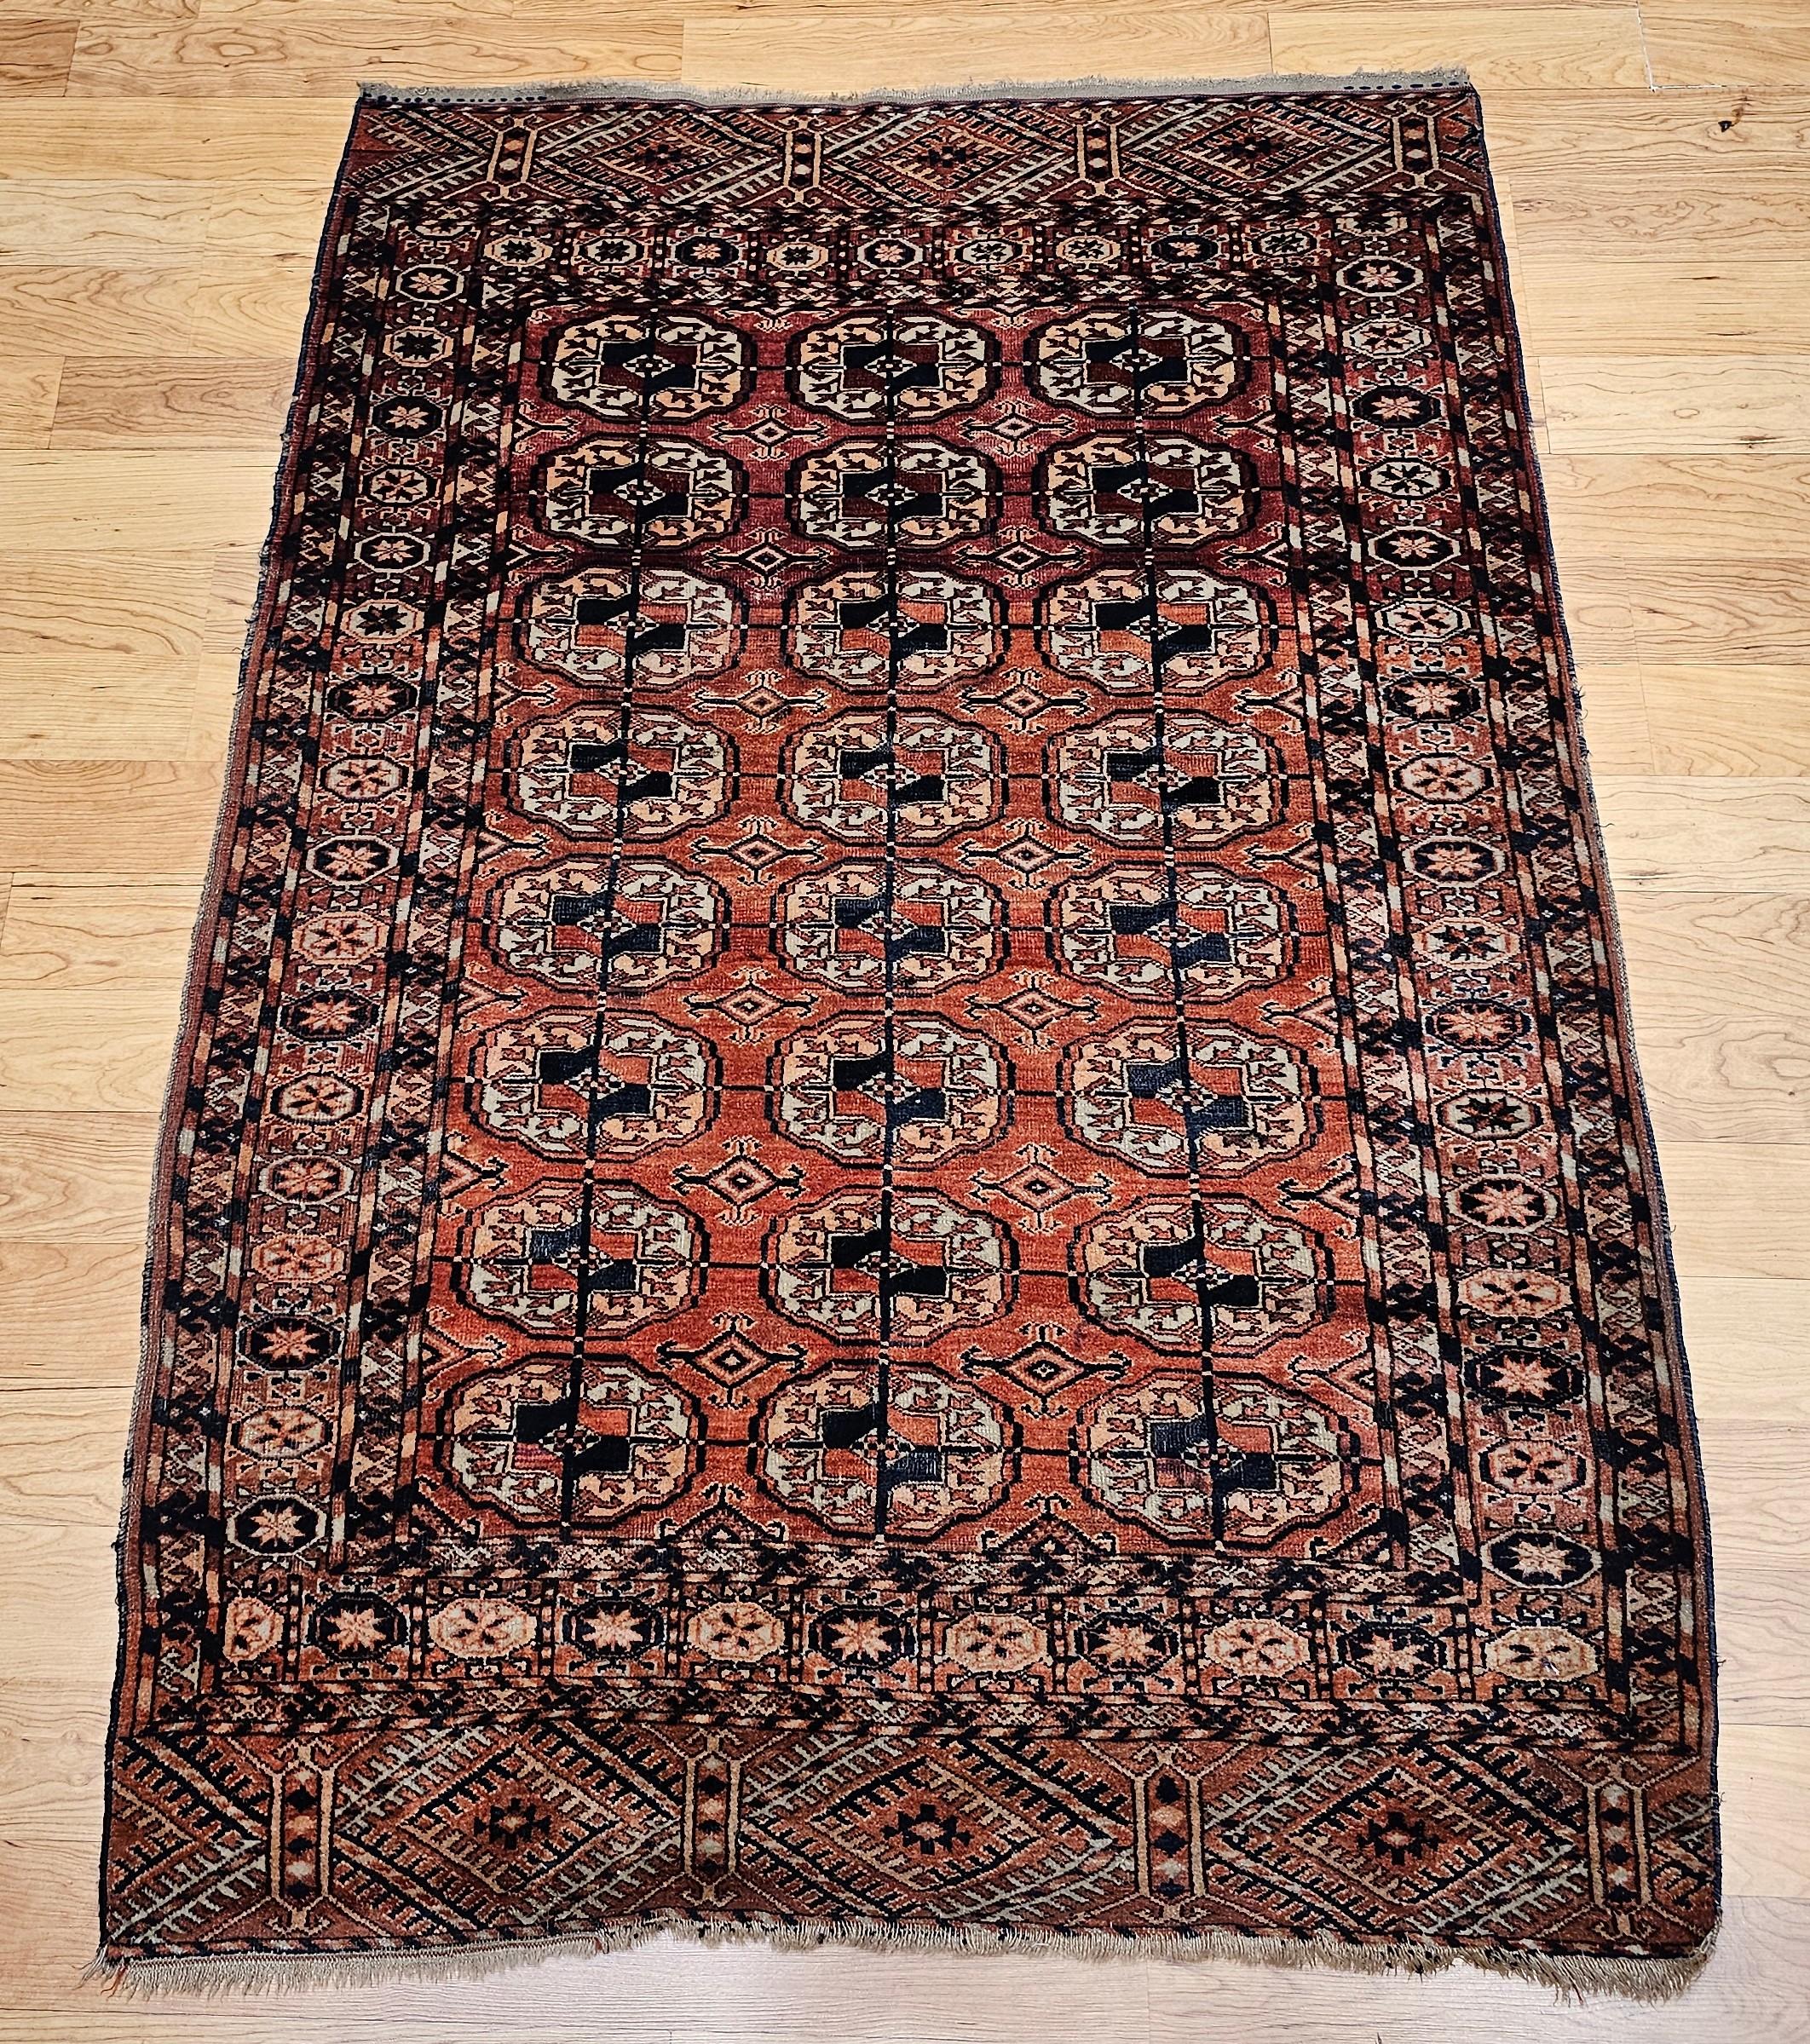 Vintage Turkmen Tekke area rug in an allover small medallion pattern from the early 1900s.  The rug has a beautiful and graceful brick-red background color.  The medallions are in brick-red, navy, yellow, and pink colors.  Rug has a very fine weave